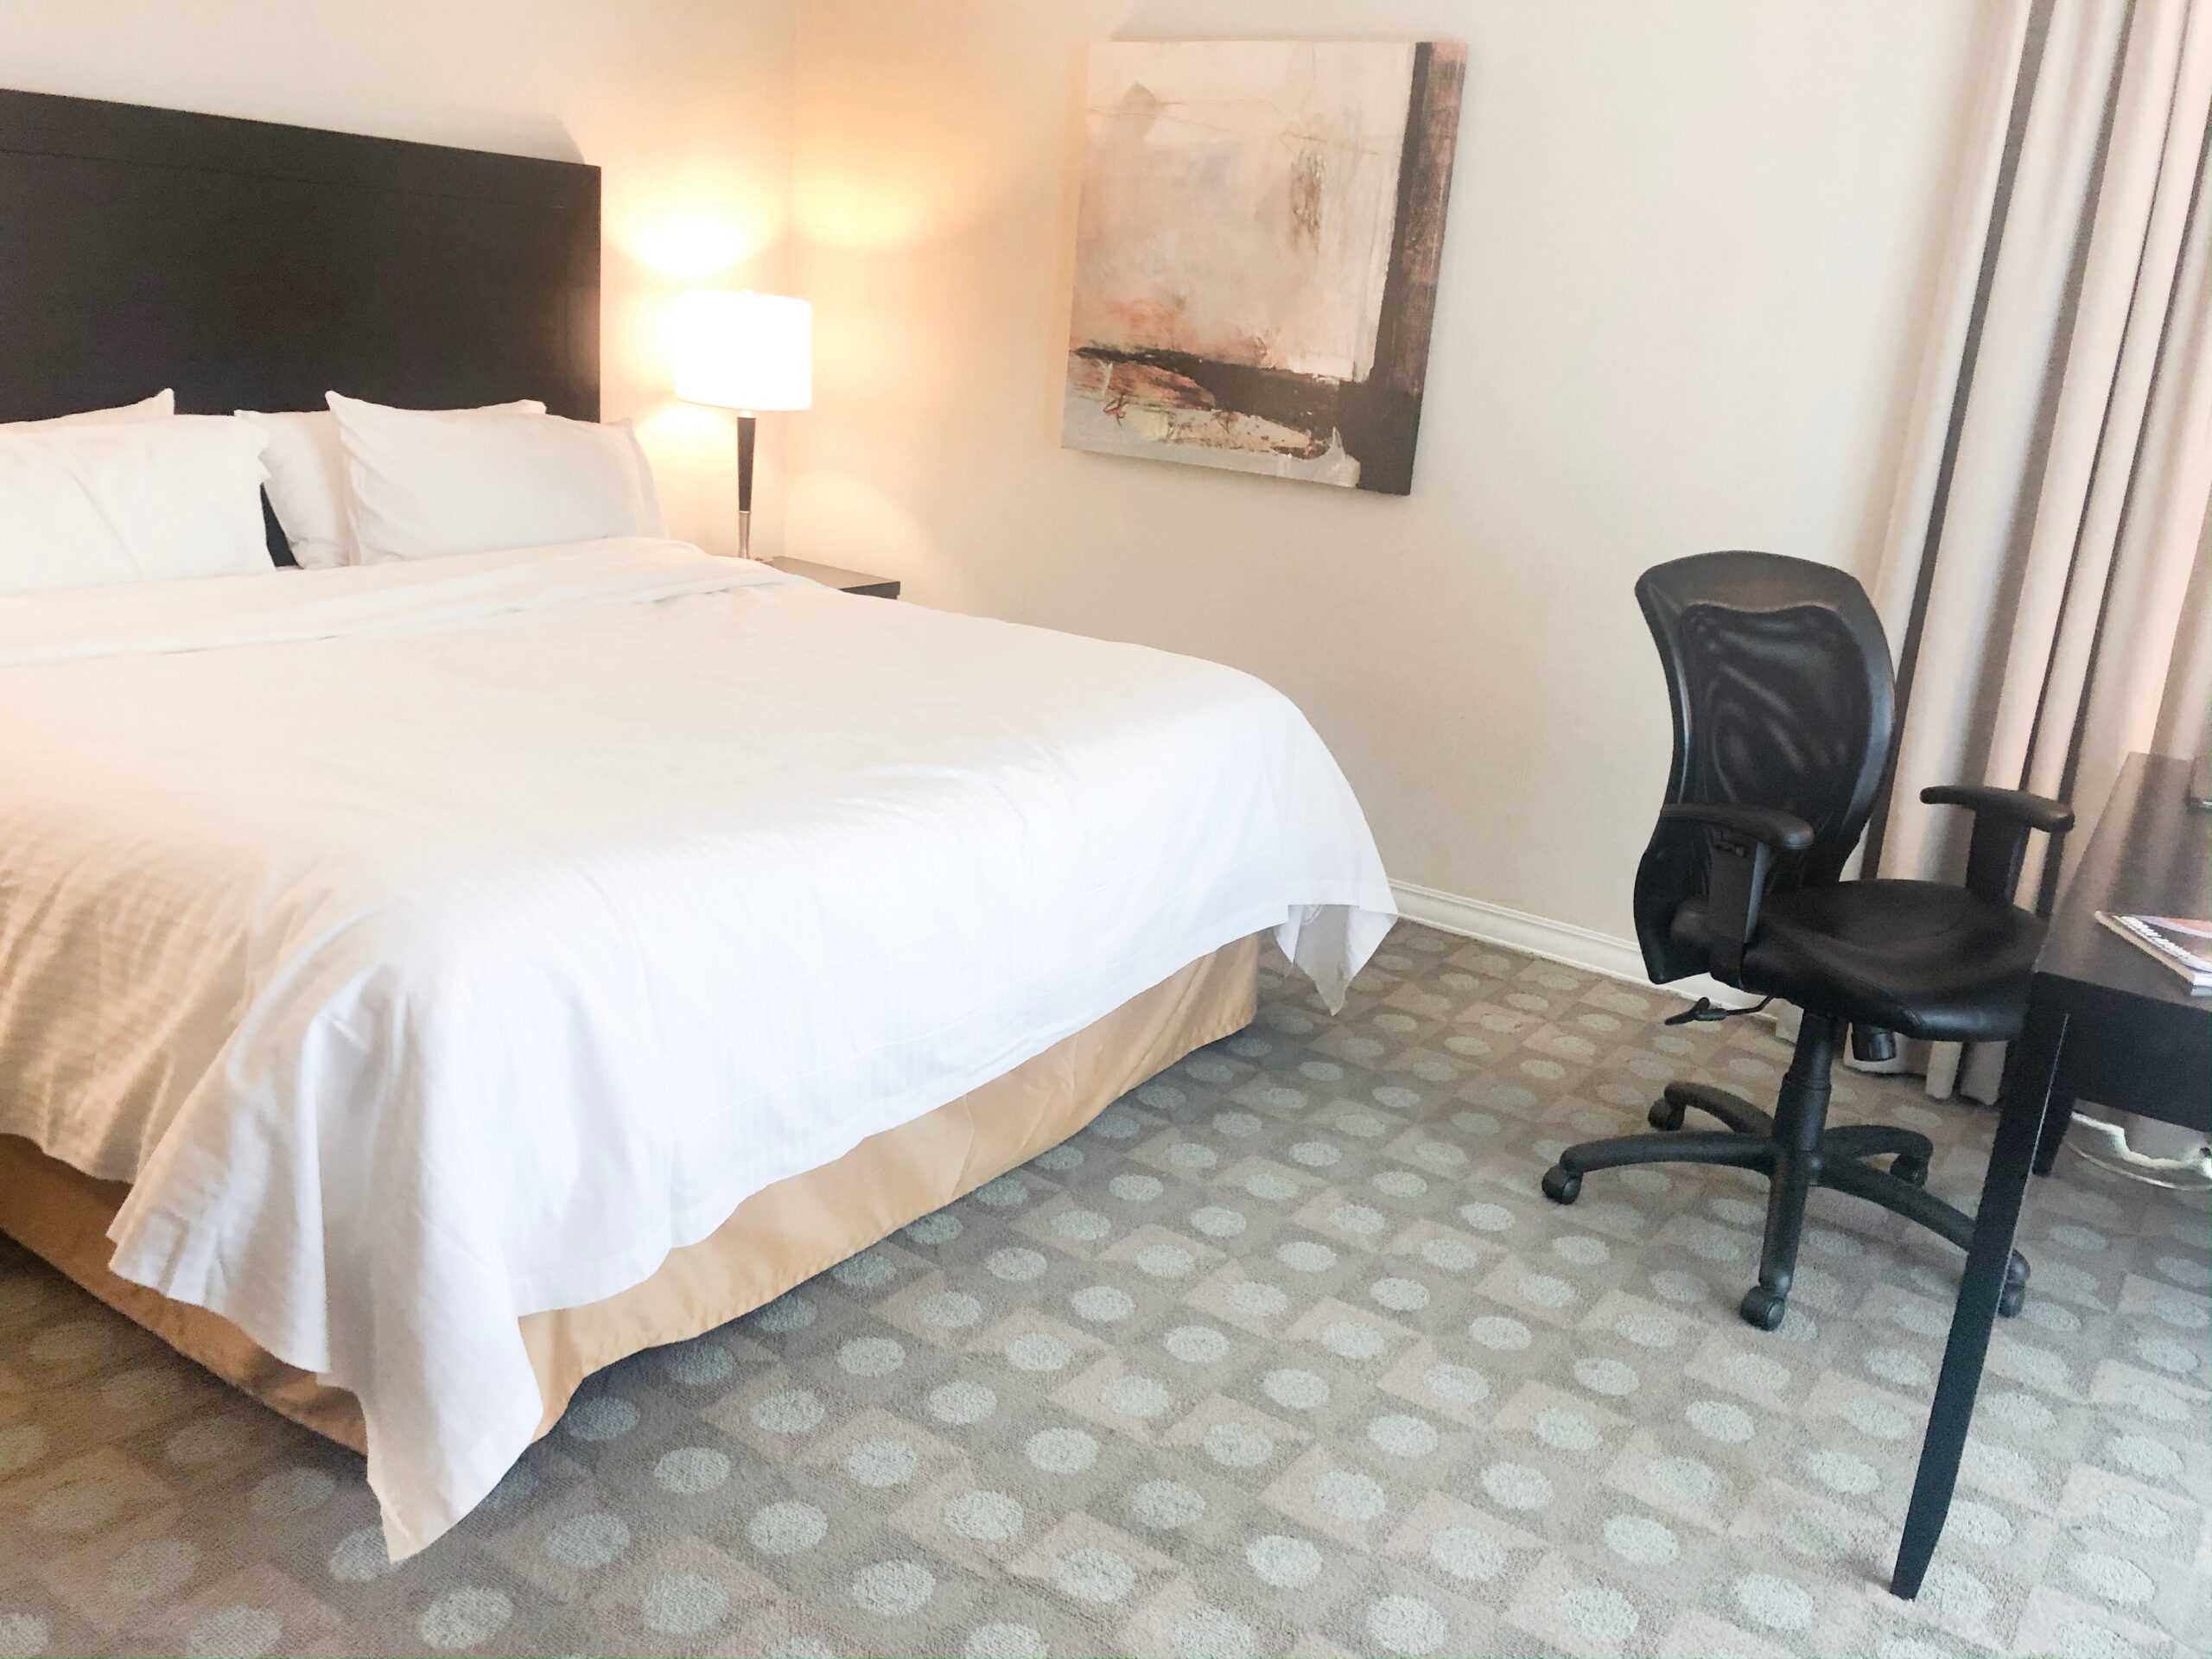 Staycation at The Chelsea Hotel, Toronto on Livin' Life with Style